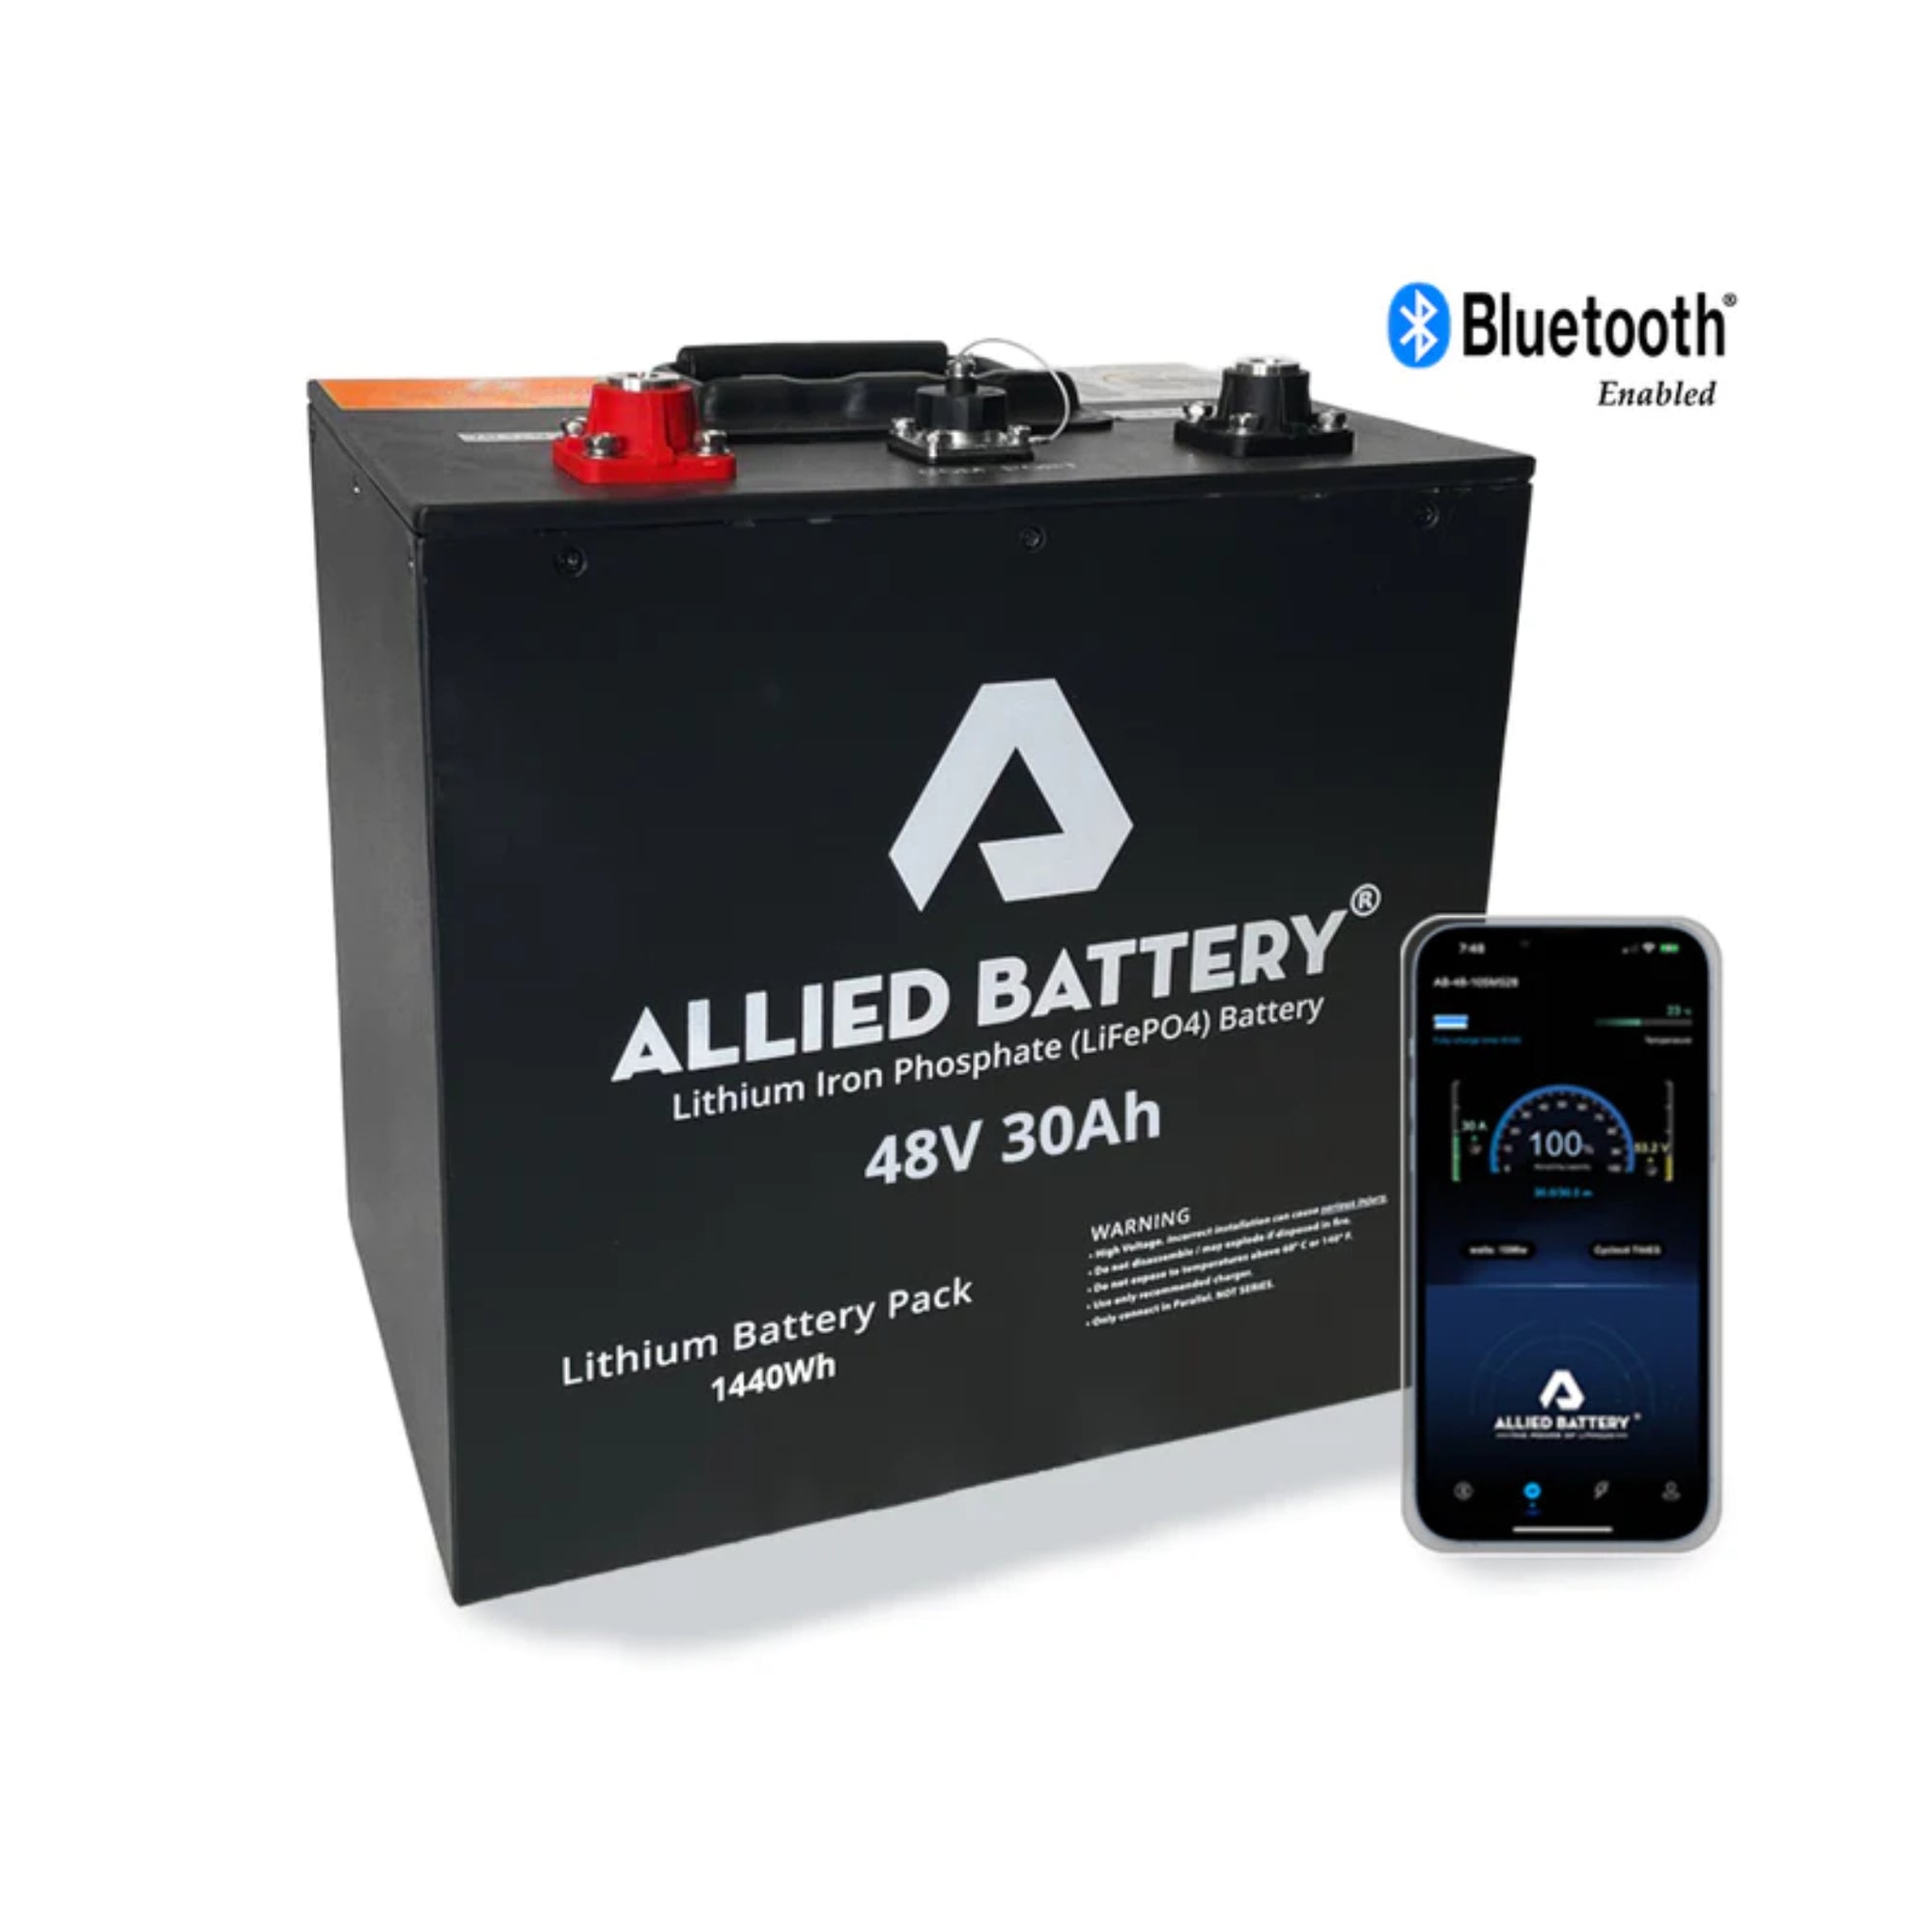 Allied Lithium 48V 30Ah "Drop-in Ready" Lithium Golf Cart Battery